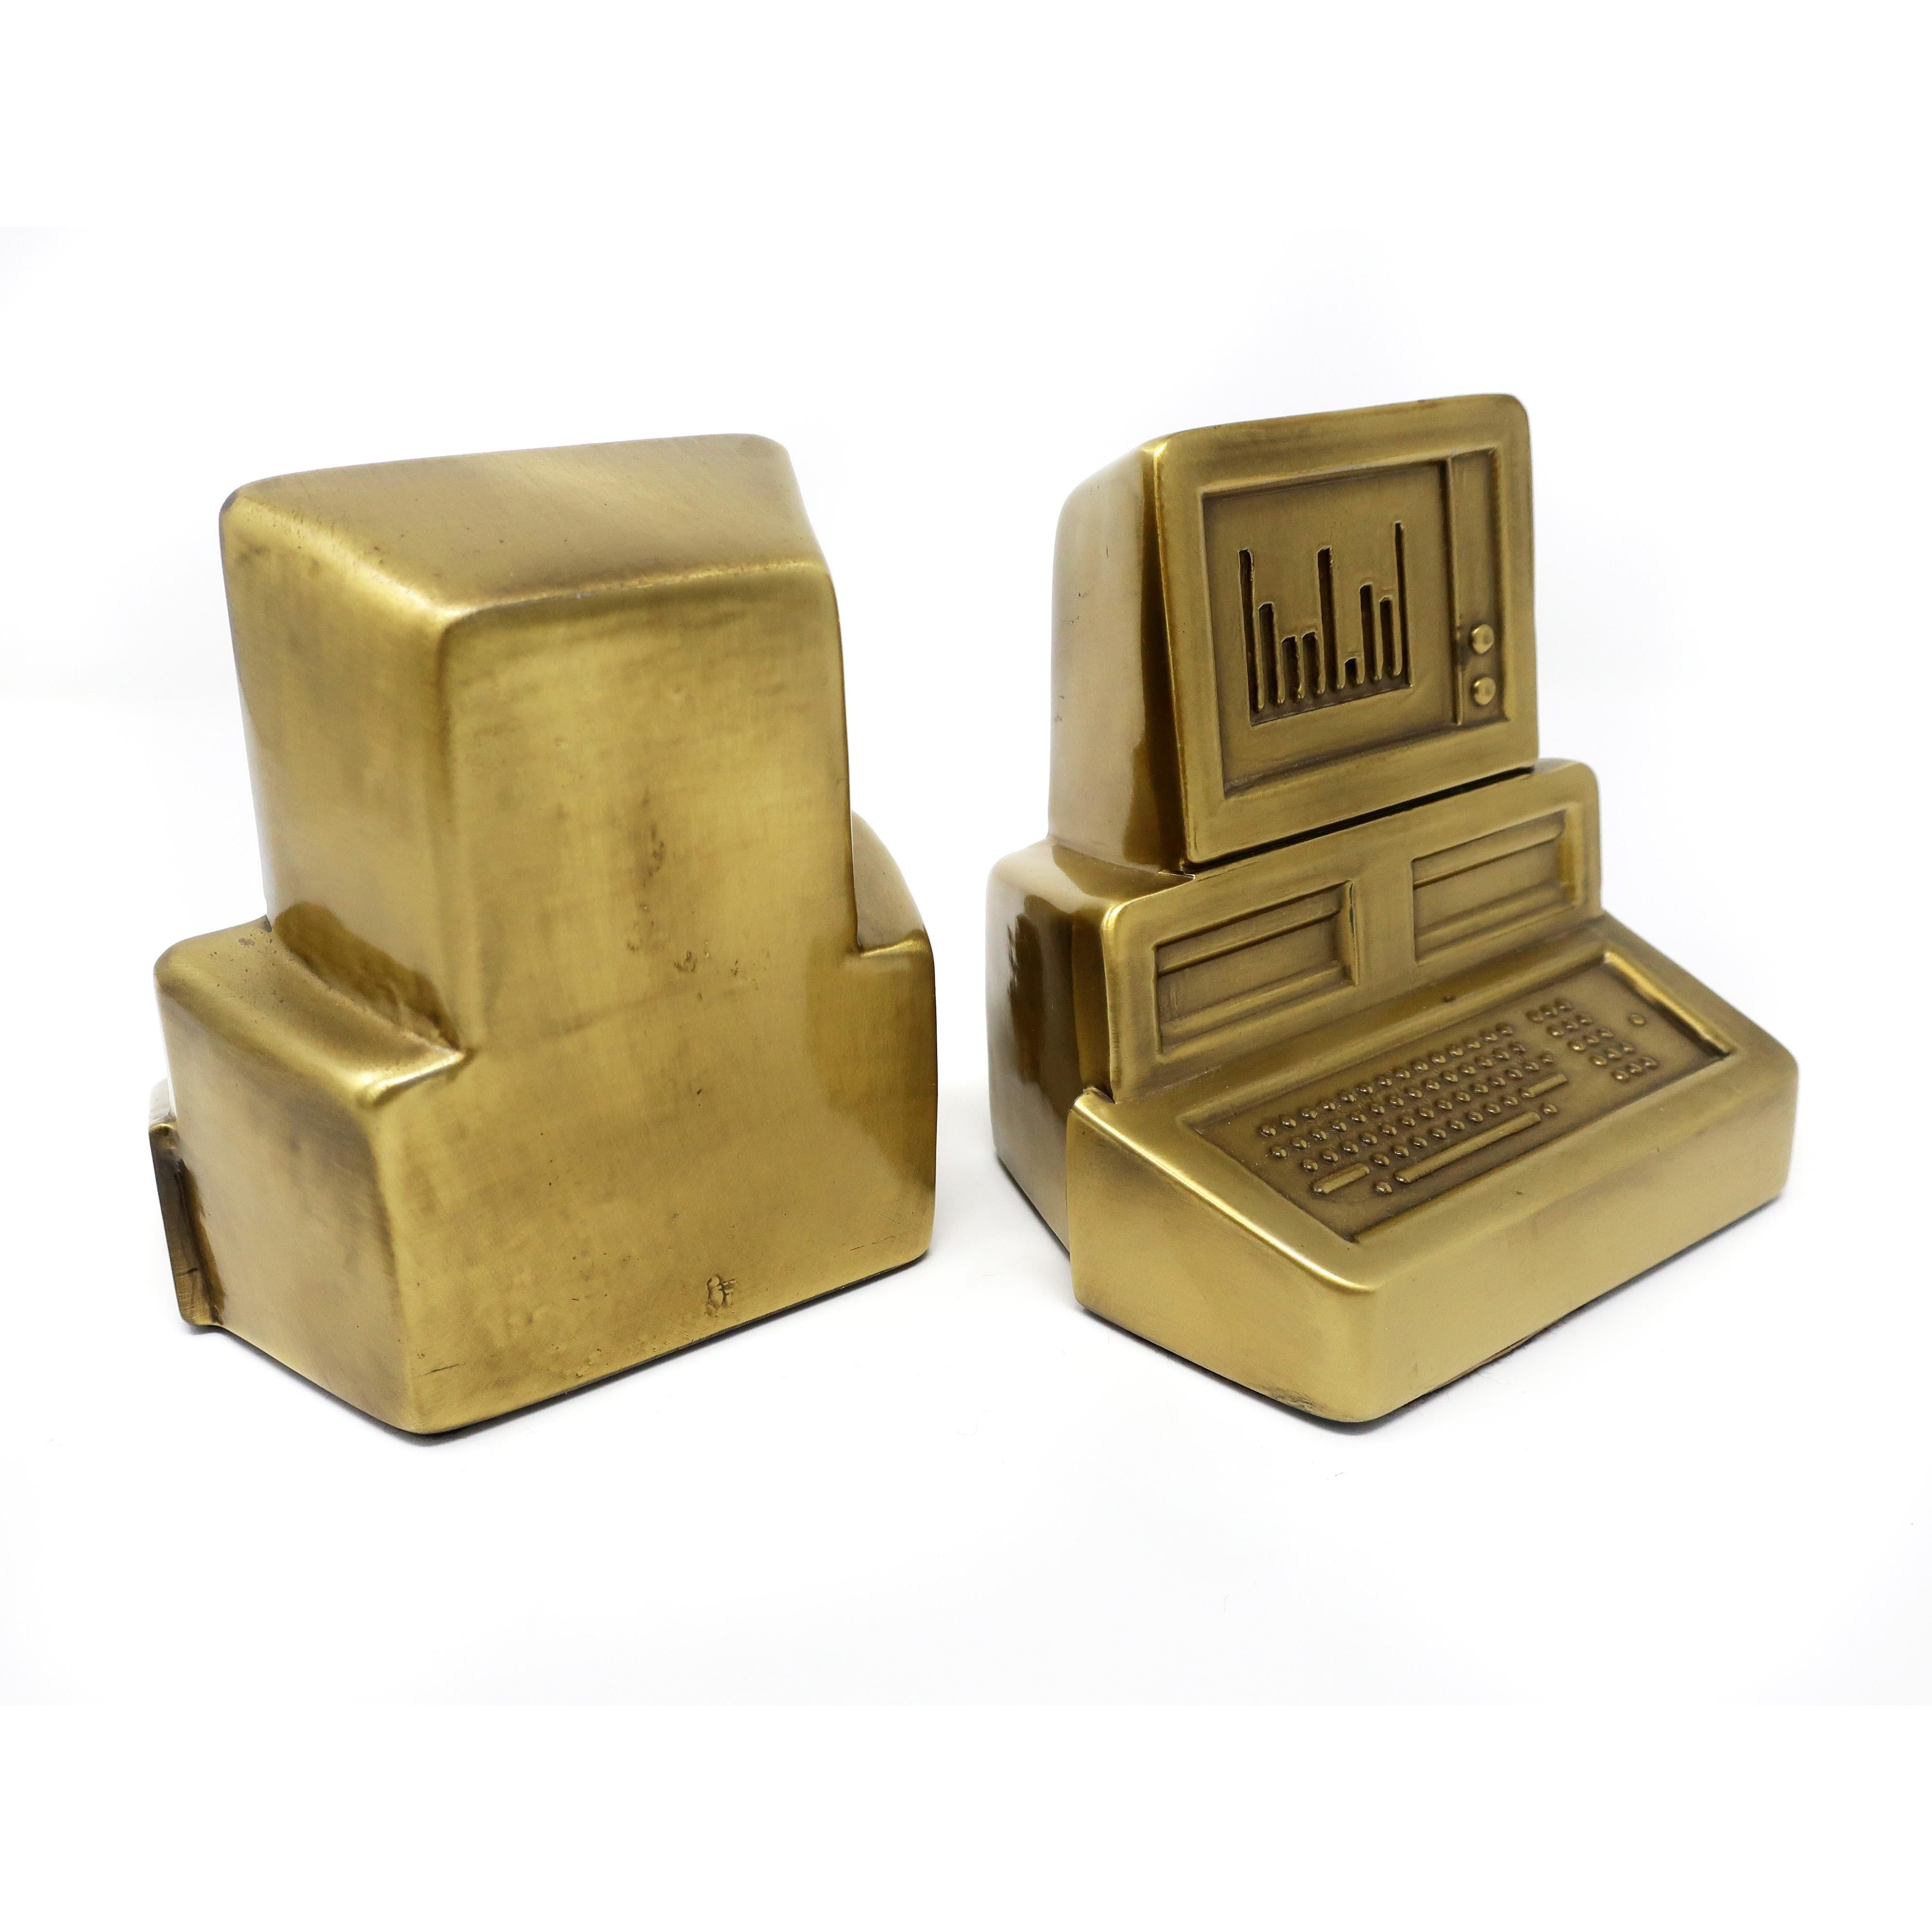 An amazing pair of 1980s brass personal computer bookends. Postmodern perfection that will keep all your vintage MS-DOS, Windows 2.0, and Commodore computer manuals organized. (They work with all other books too!)

In excellent vintage